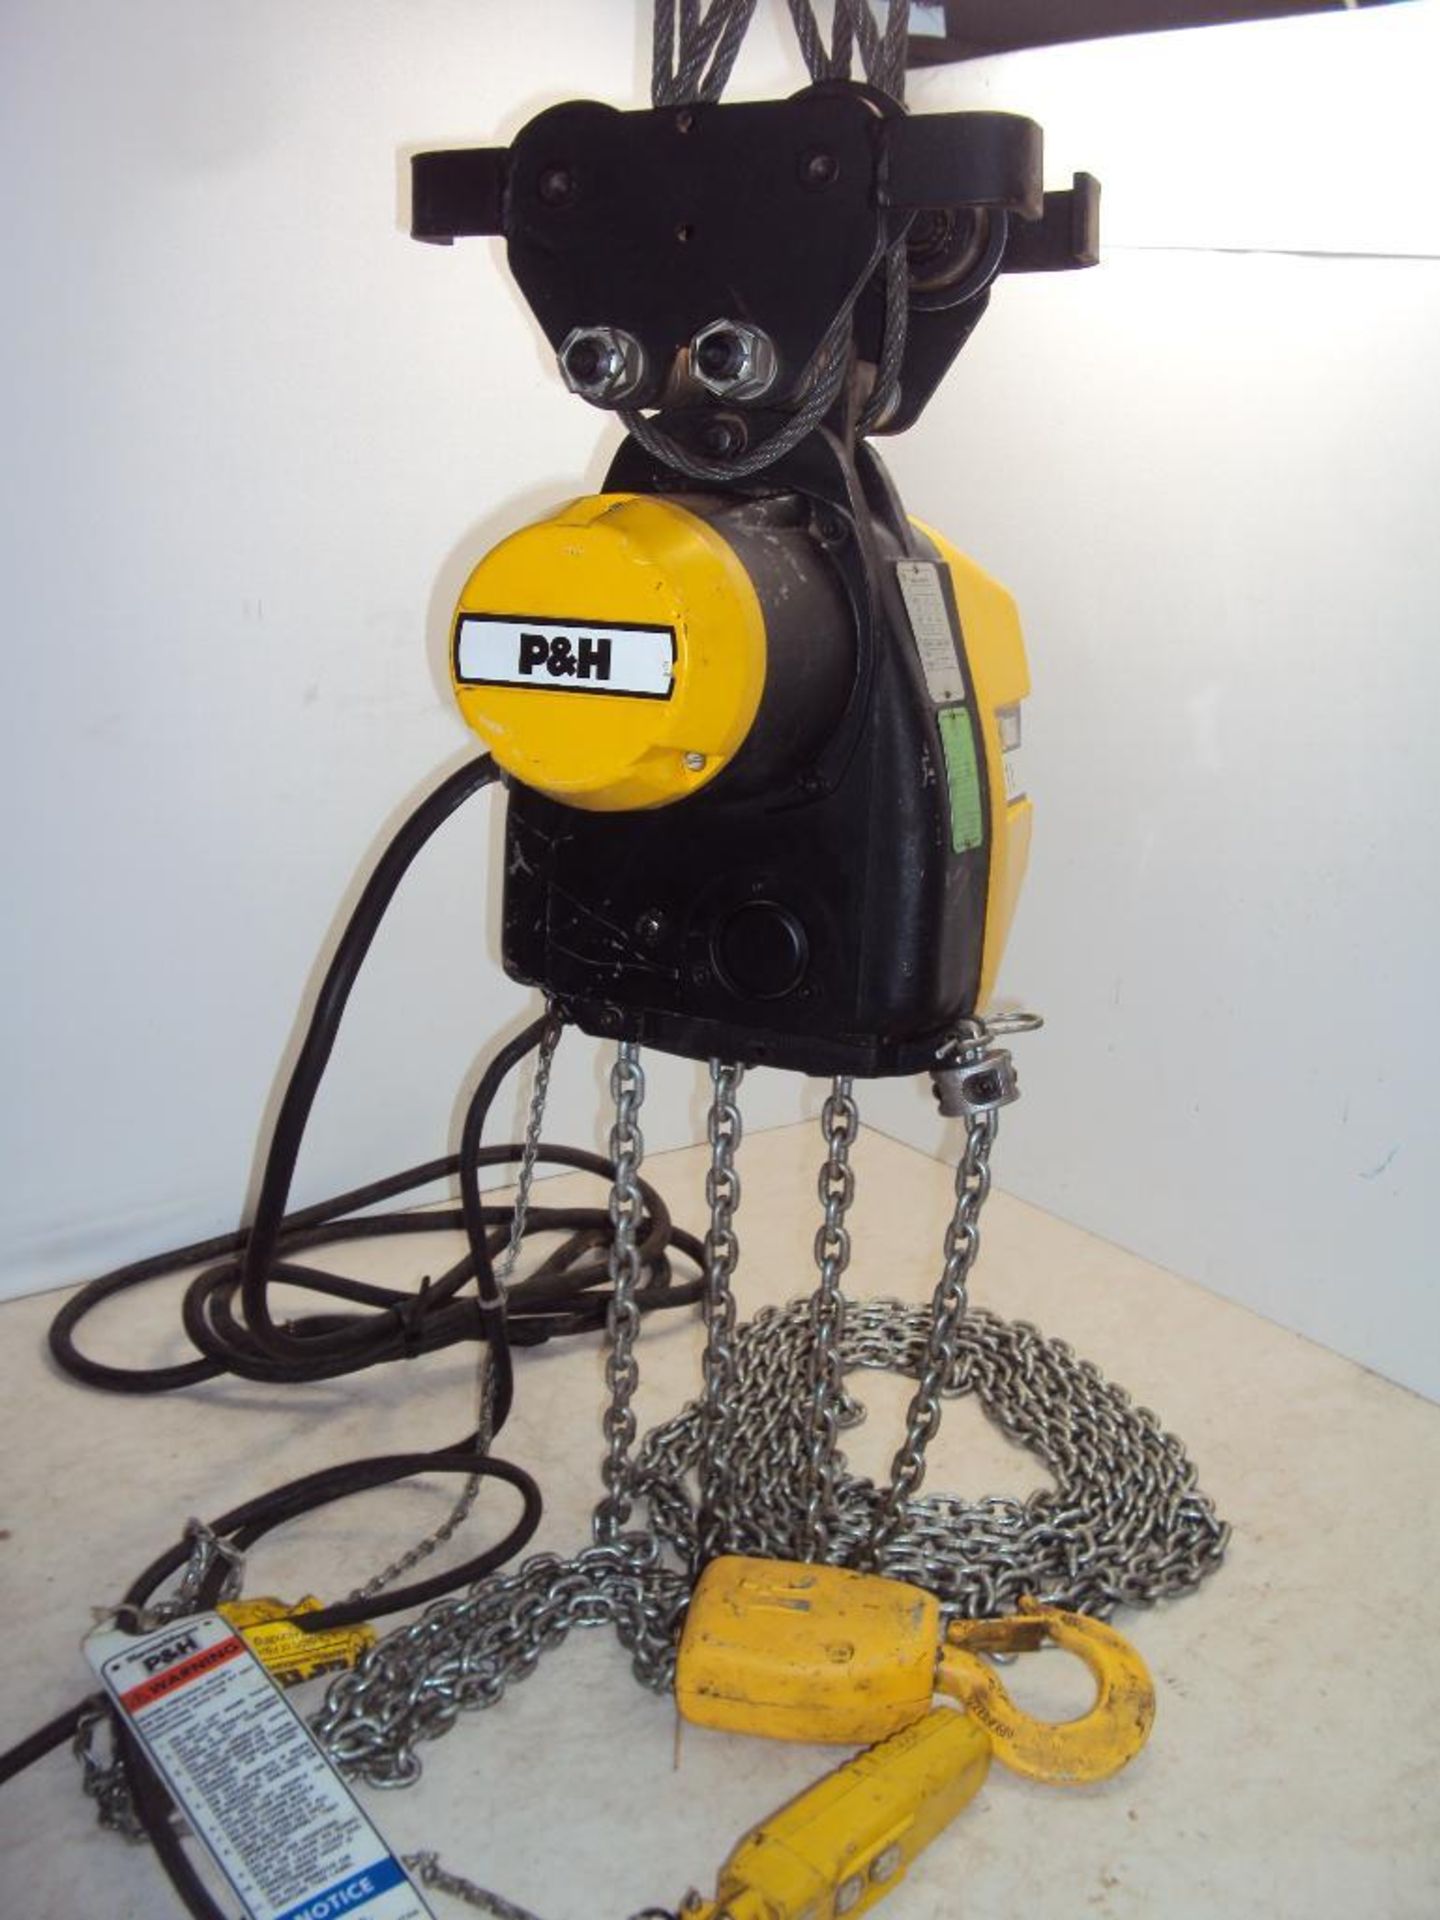 P&H Redi-Lift 20' Drop 1 Ton Electric Chain Hoist and Trolley - Image 2 of 7